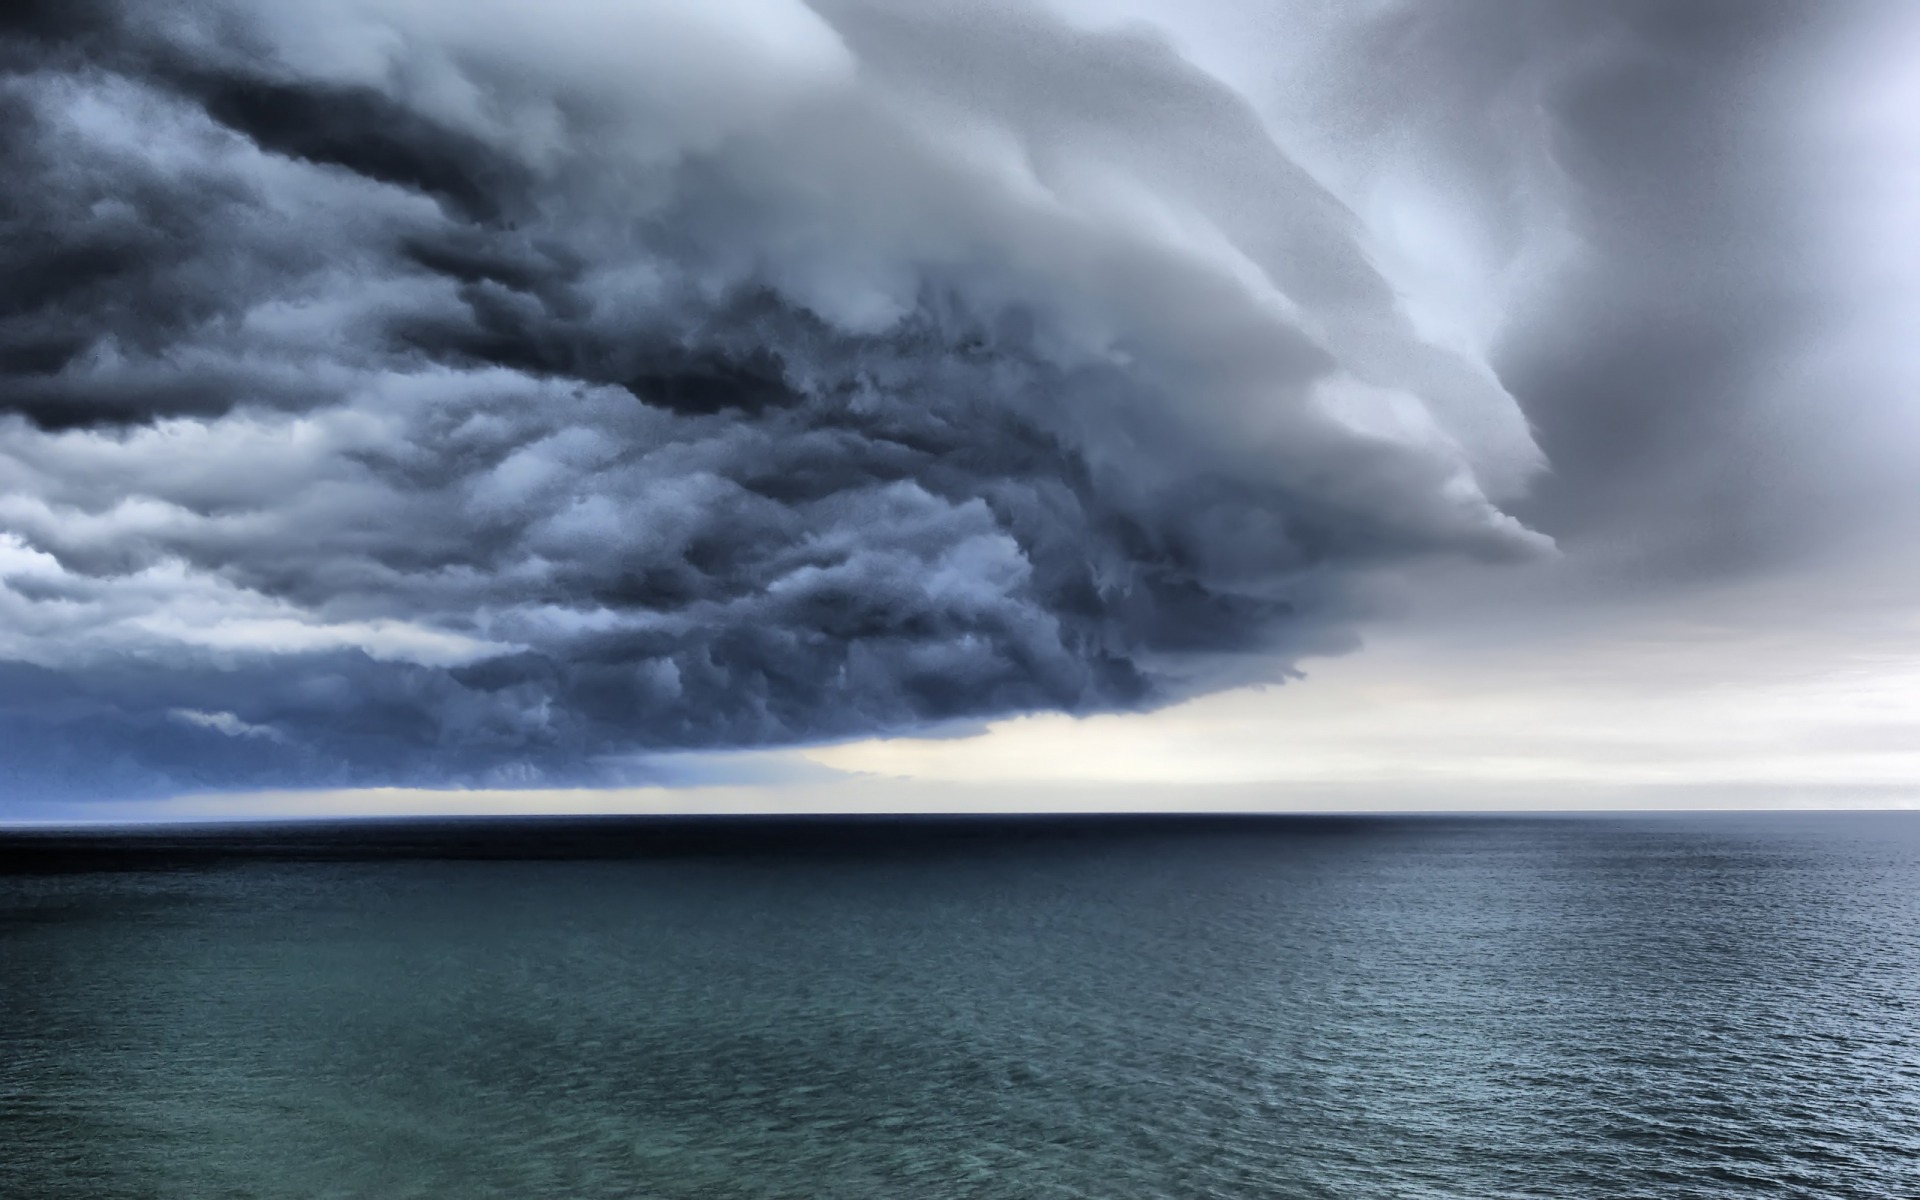 The Storm Over Sea Wallpaper And Image